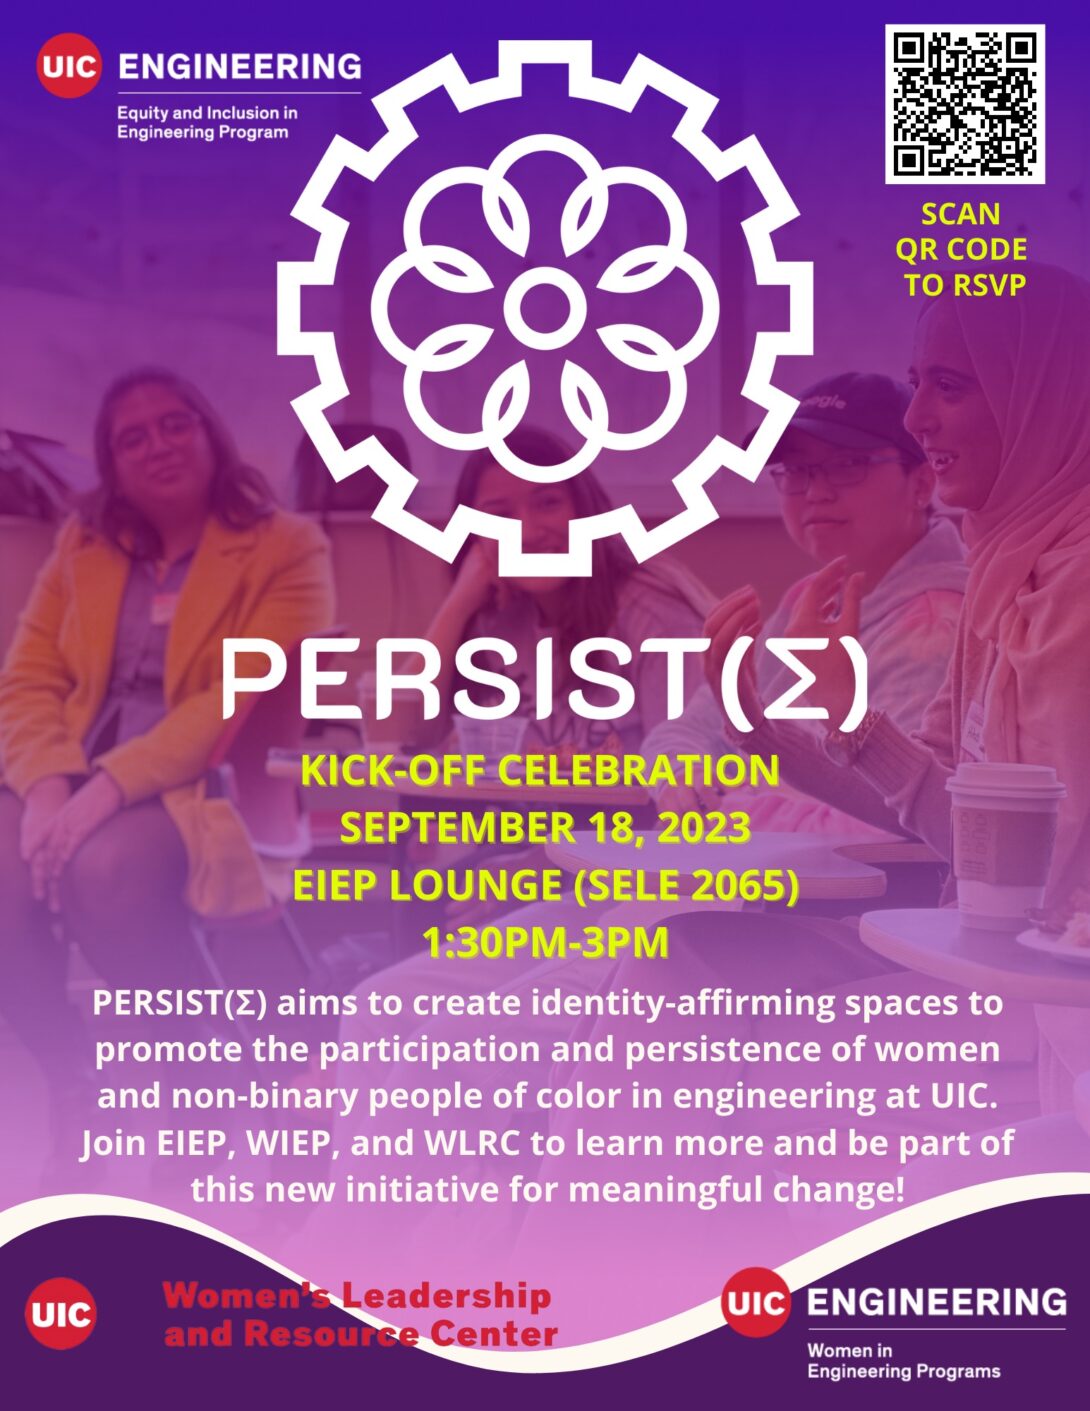 A photo of students sitting in a classroom and having a discussion, washed in a pink-purple gradient. On top of that is the PERSIST(Σ) logo, a stylized gear, and details about the kickoff celebration, in white and yellow text (same info on this page)..